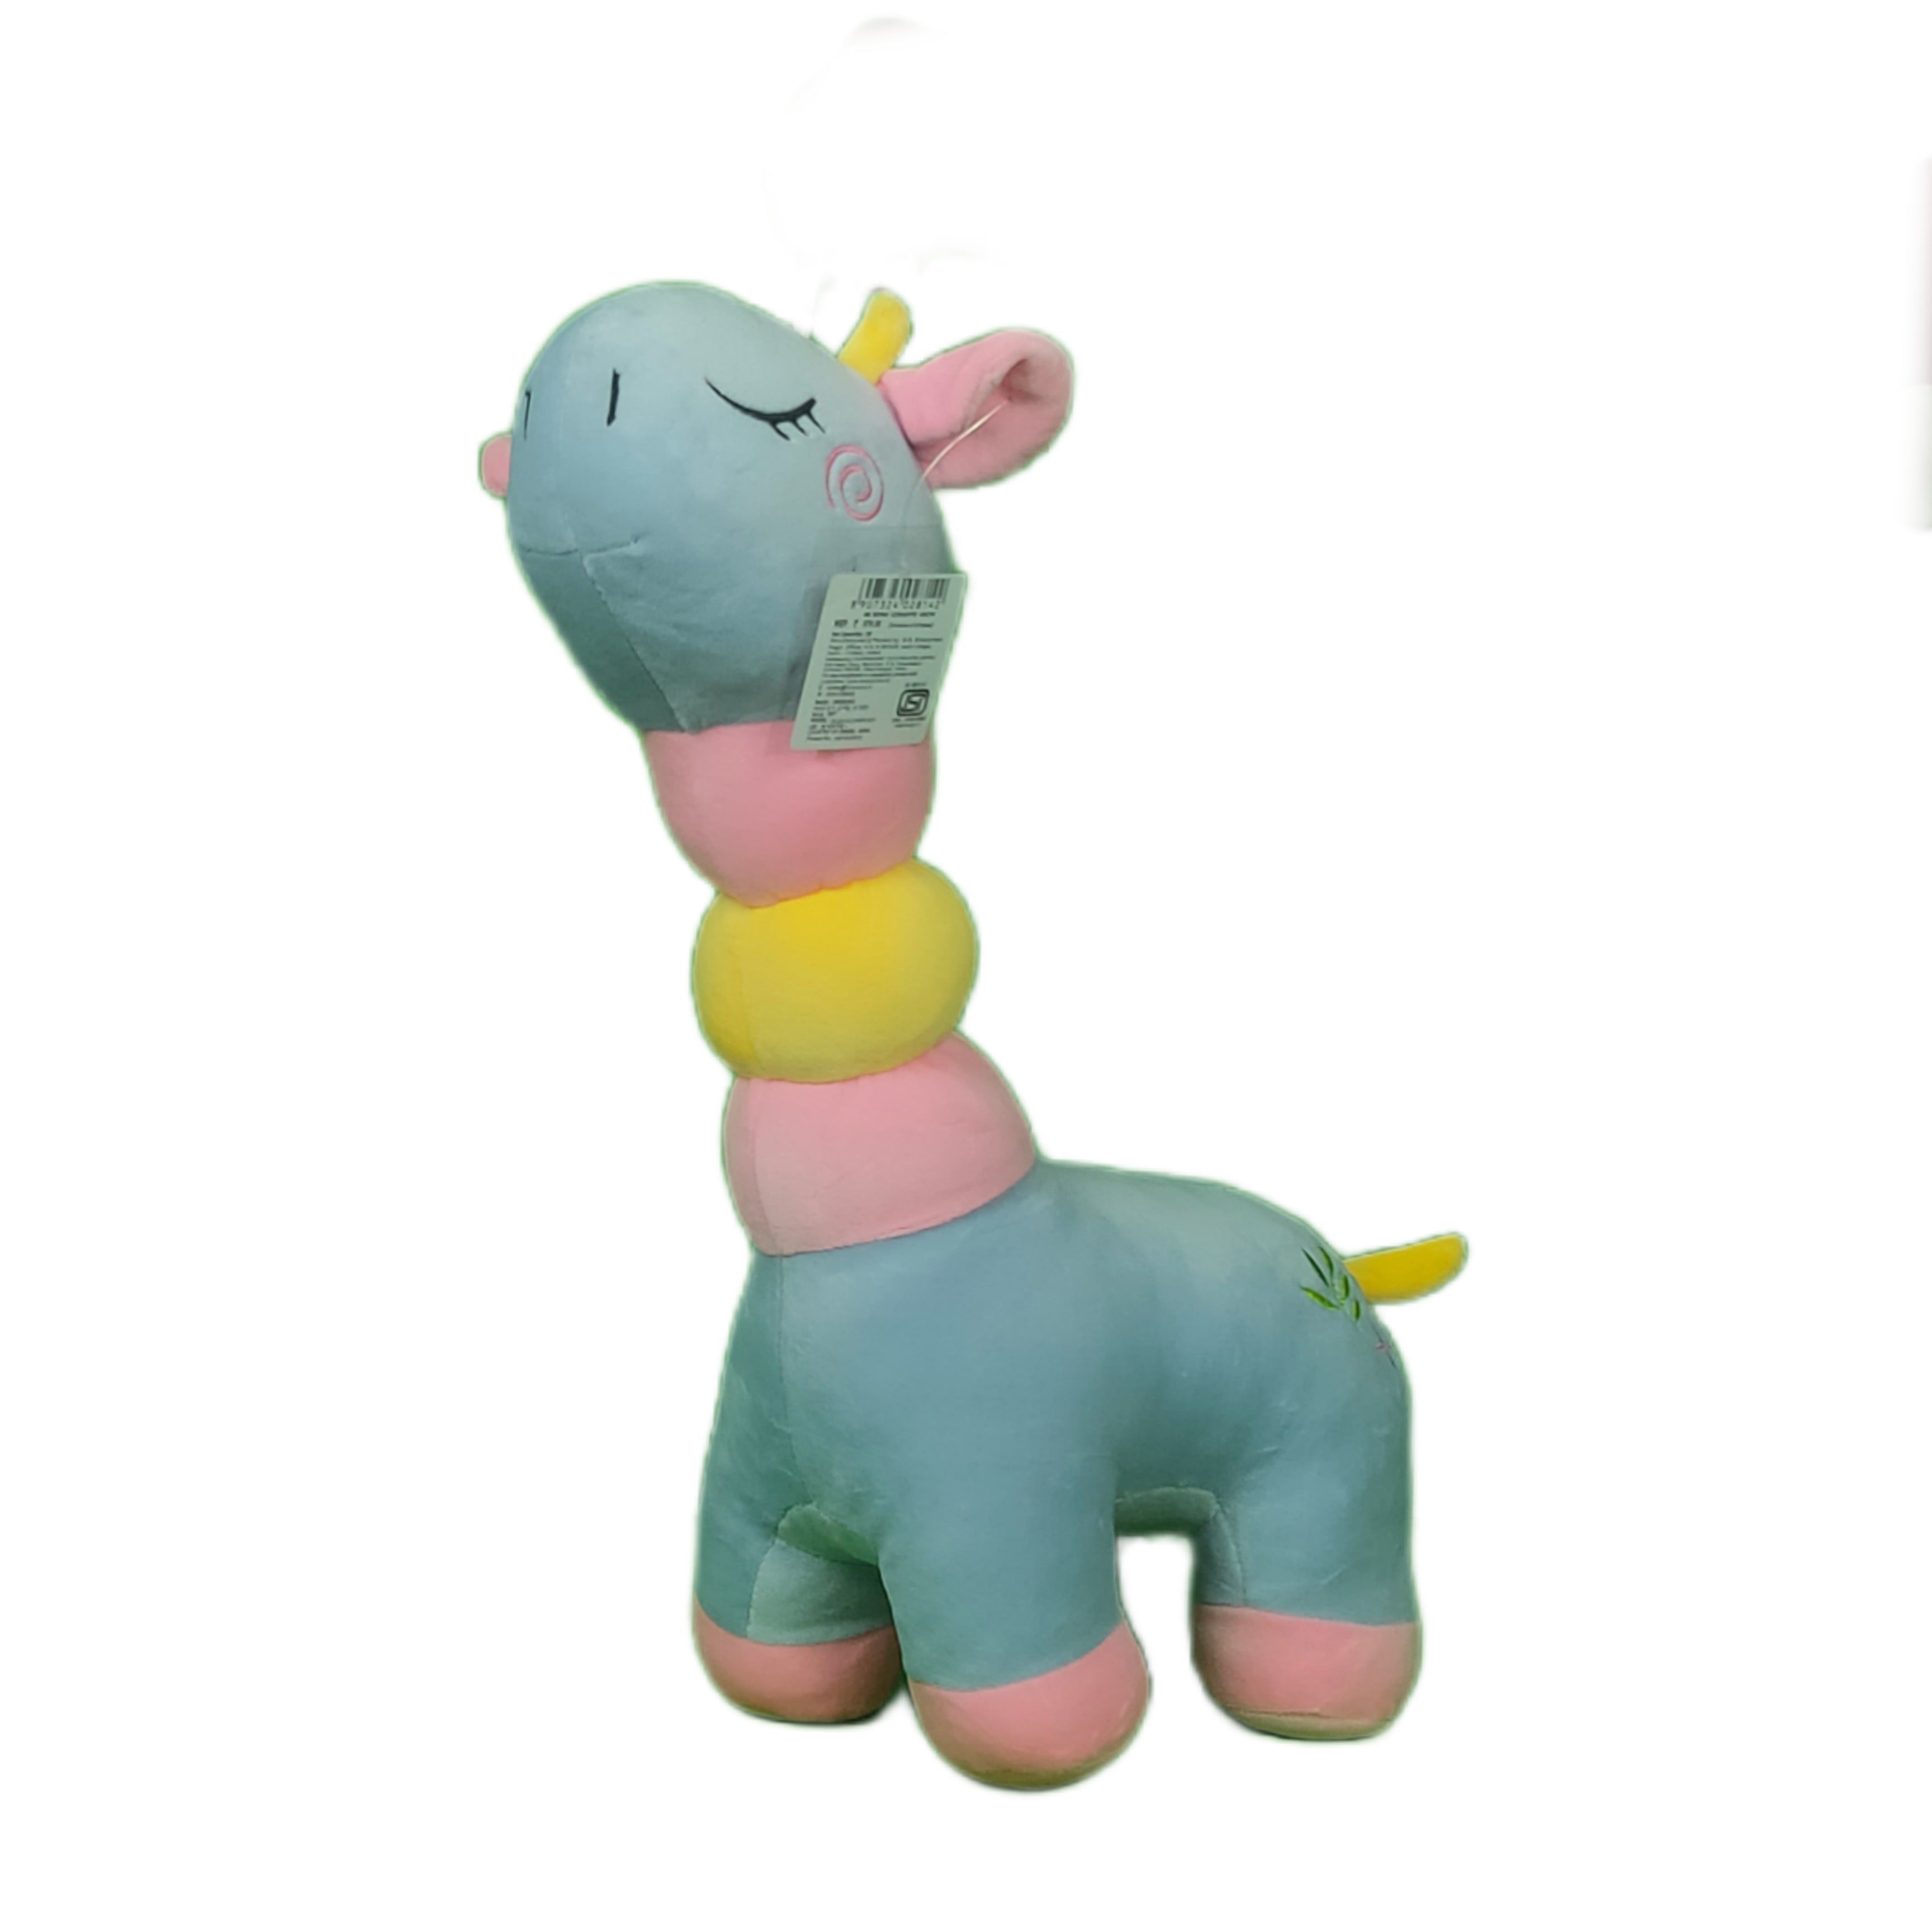 Play Hour Ring Giraffe Plush Soft Toy for Ages 3 Years and Up, Lavender, 45cm